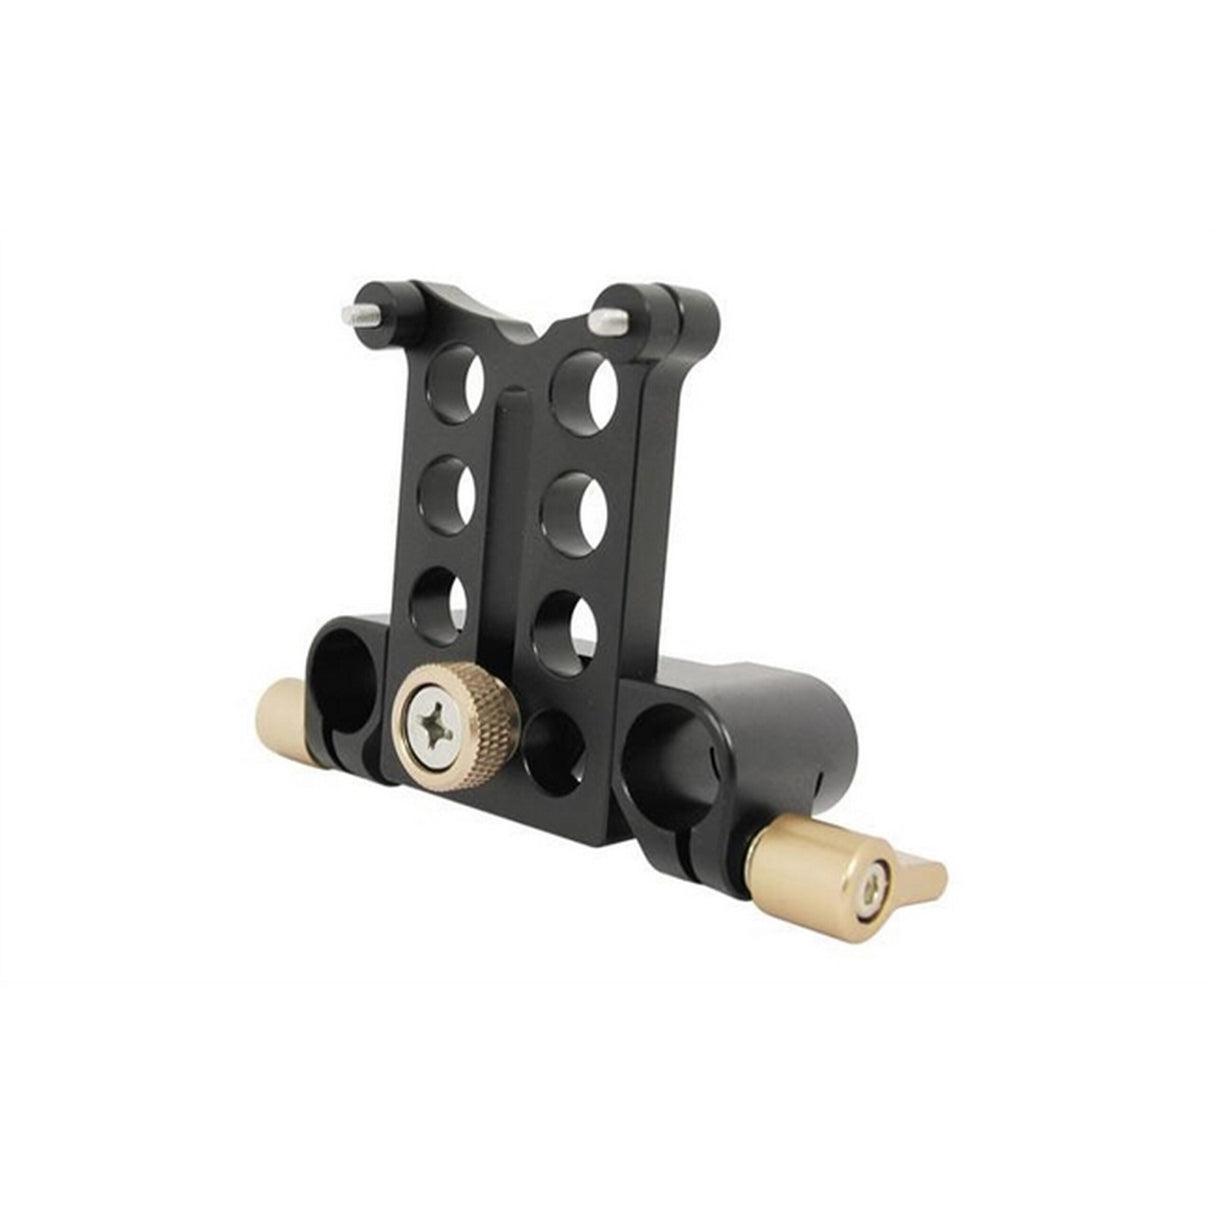 Genustech G-HEB Extension Bracket for GWMC, Wide Clip-On Matte Box System